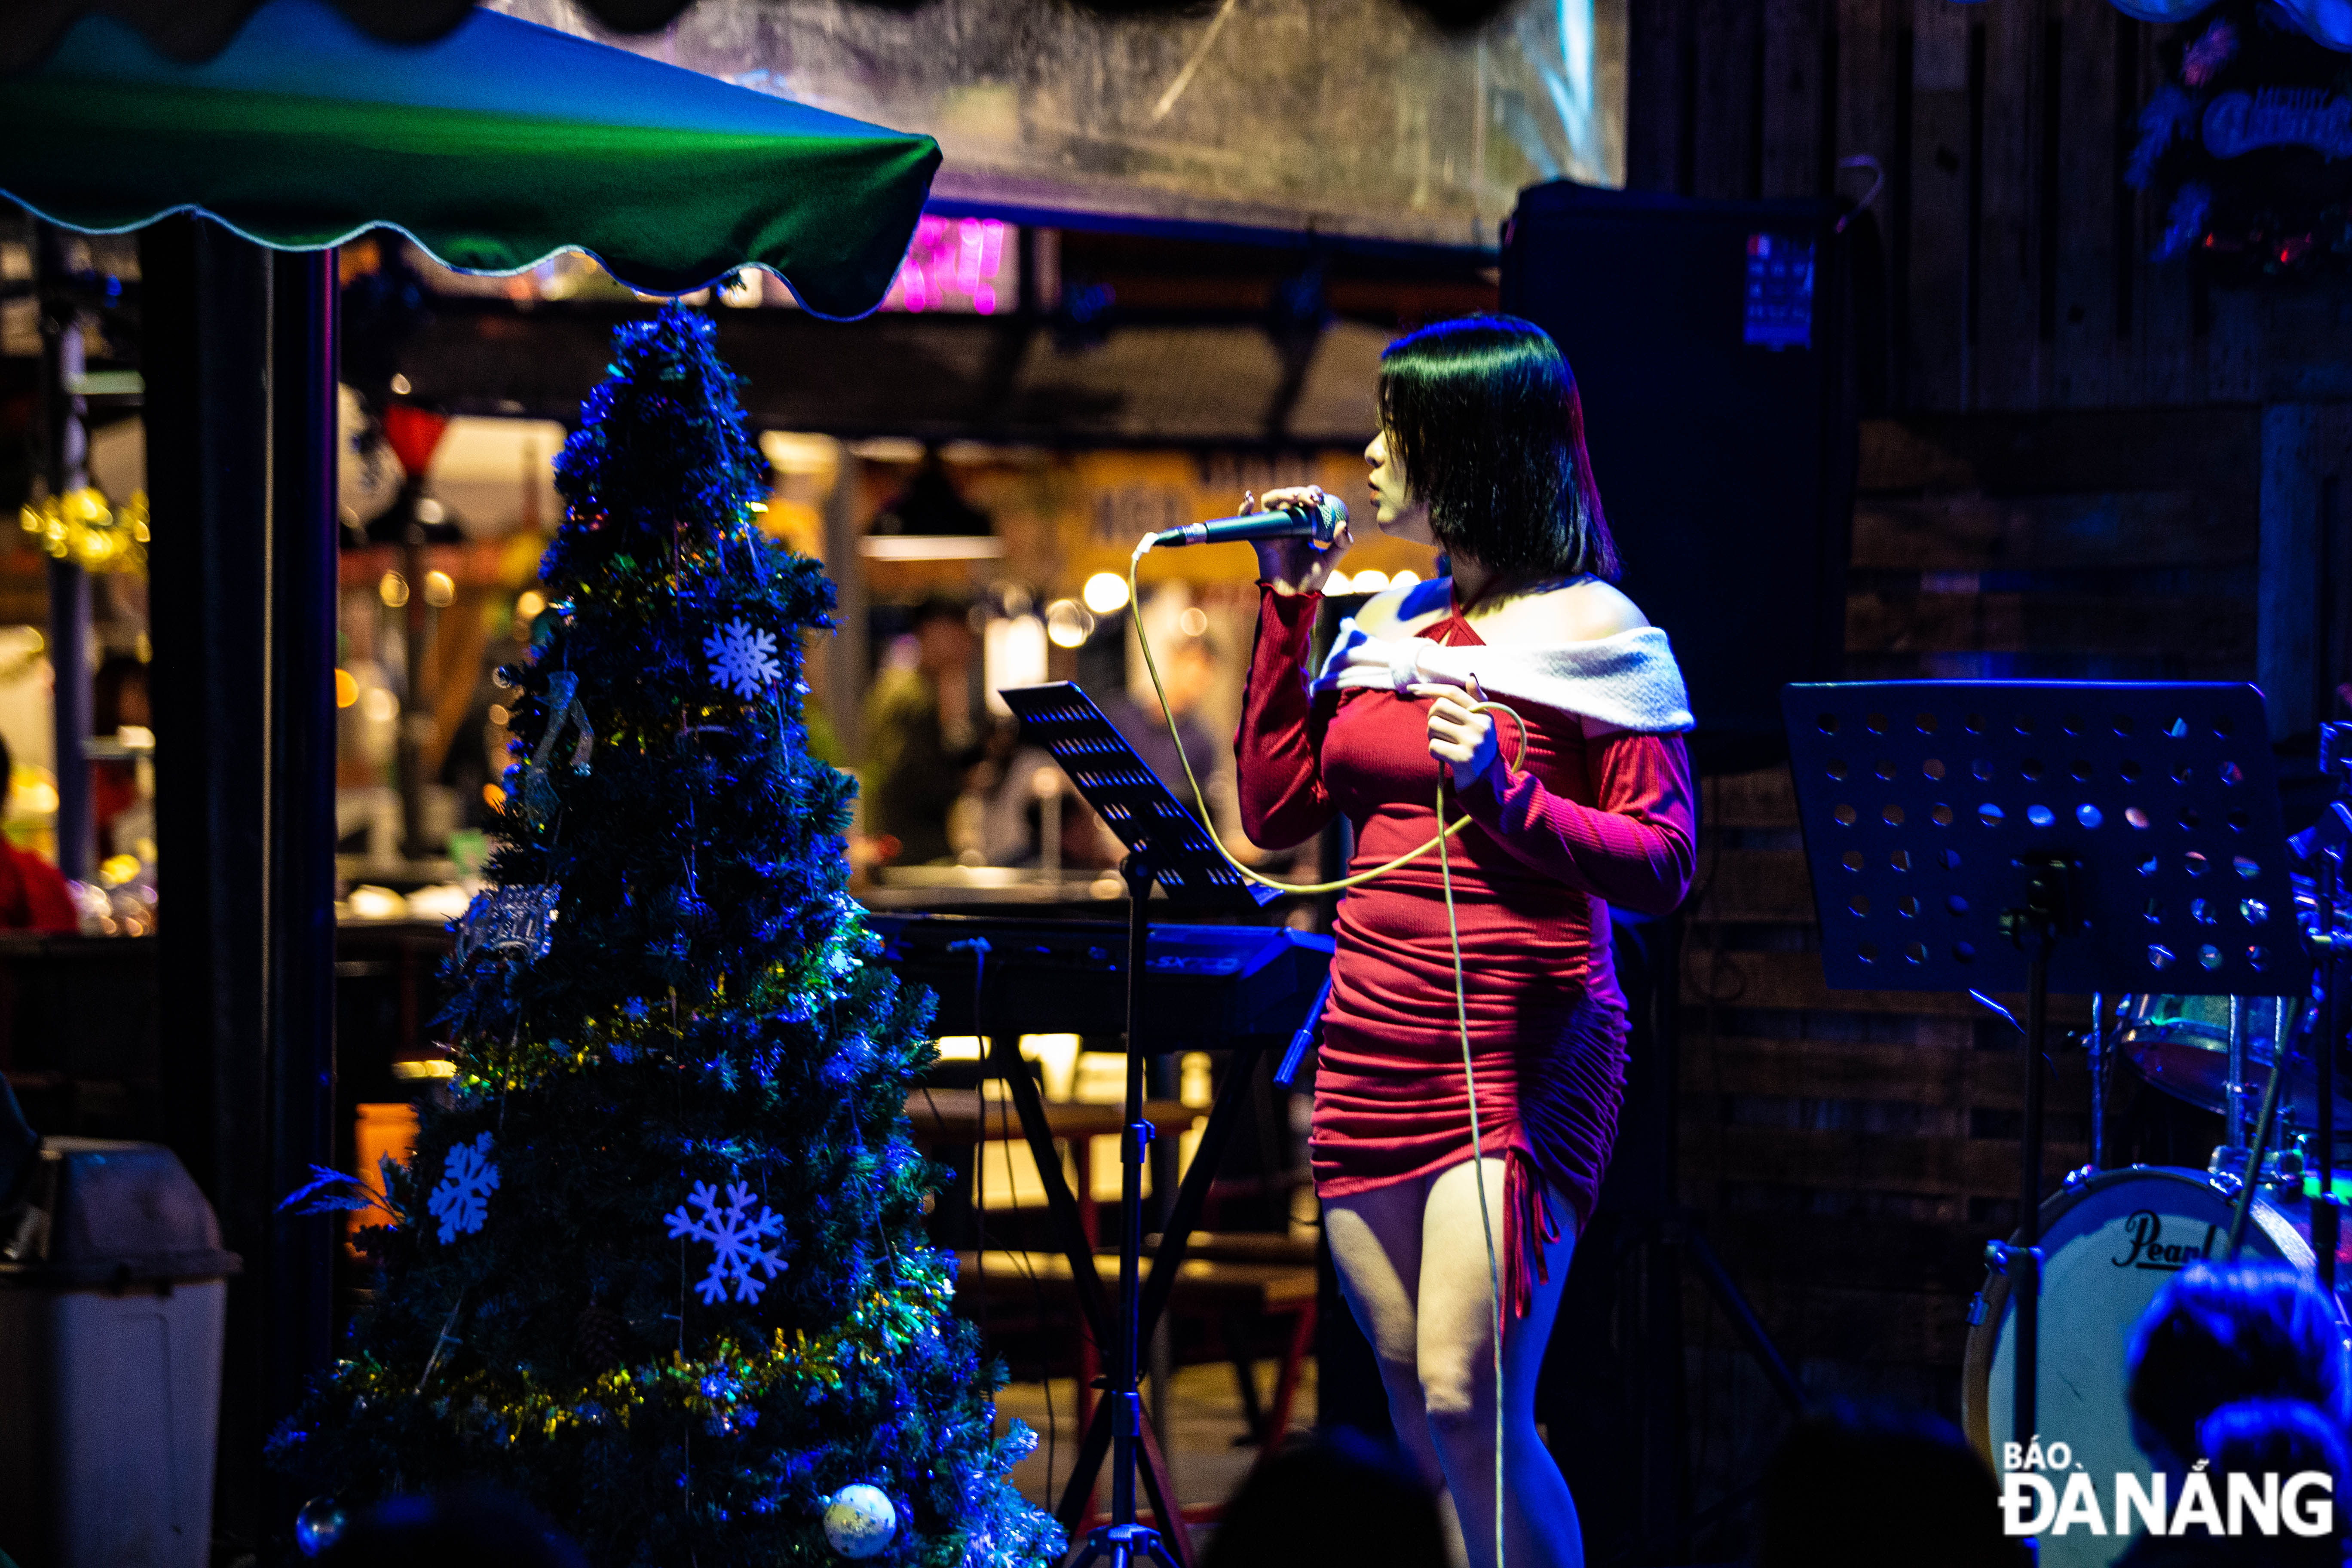 Many cultural activities related to the Christmas theme are held at the Helio night market.